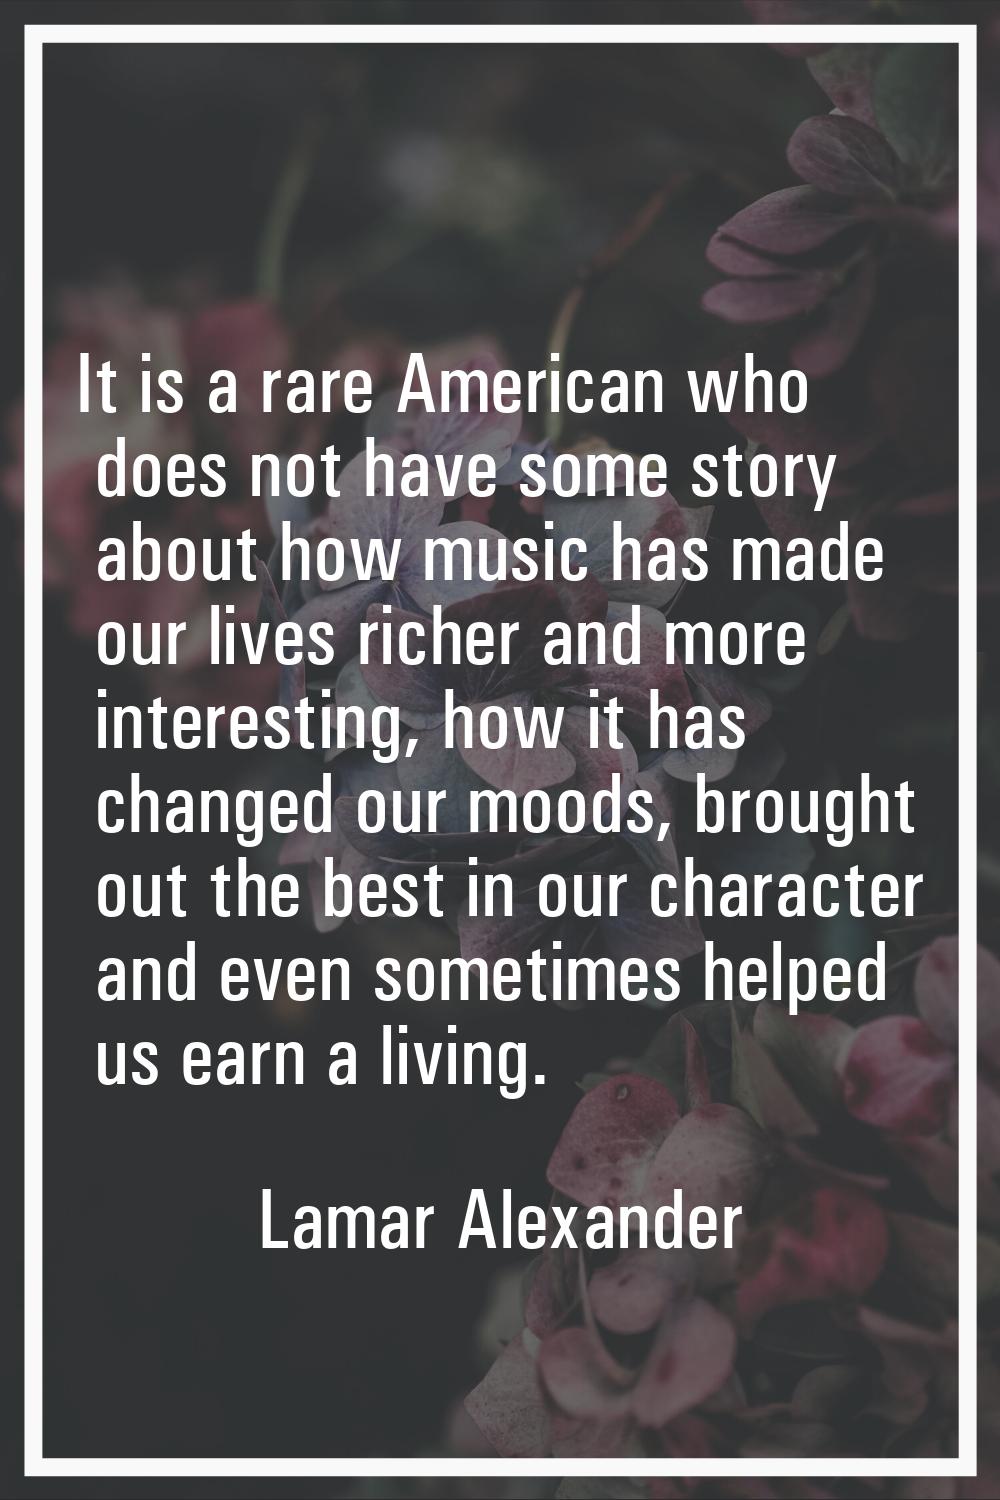 It is a rare American who does not have some story about how music has made our lives richer and mo